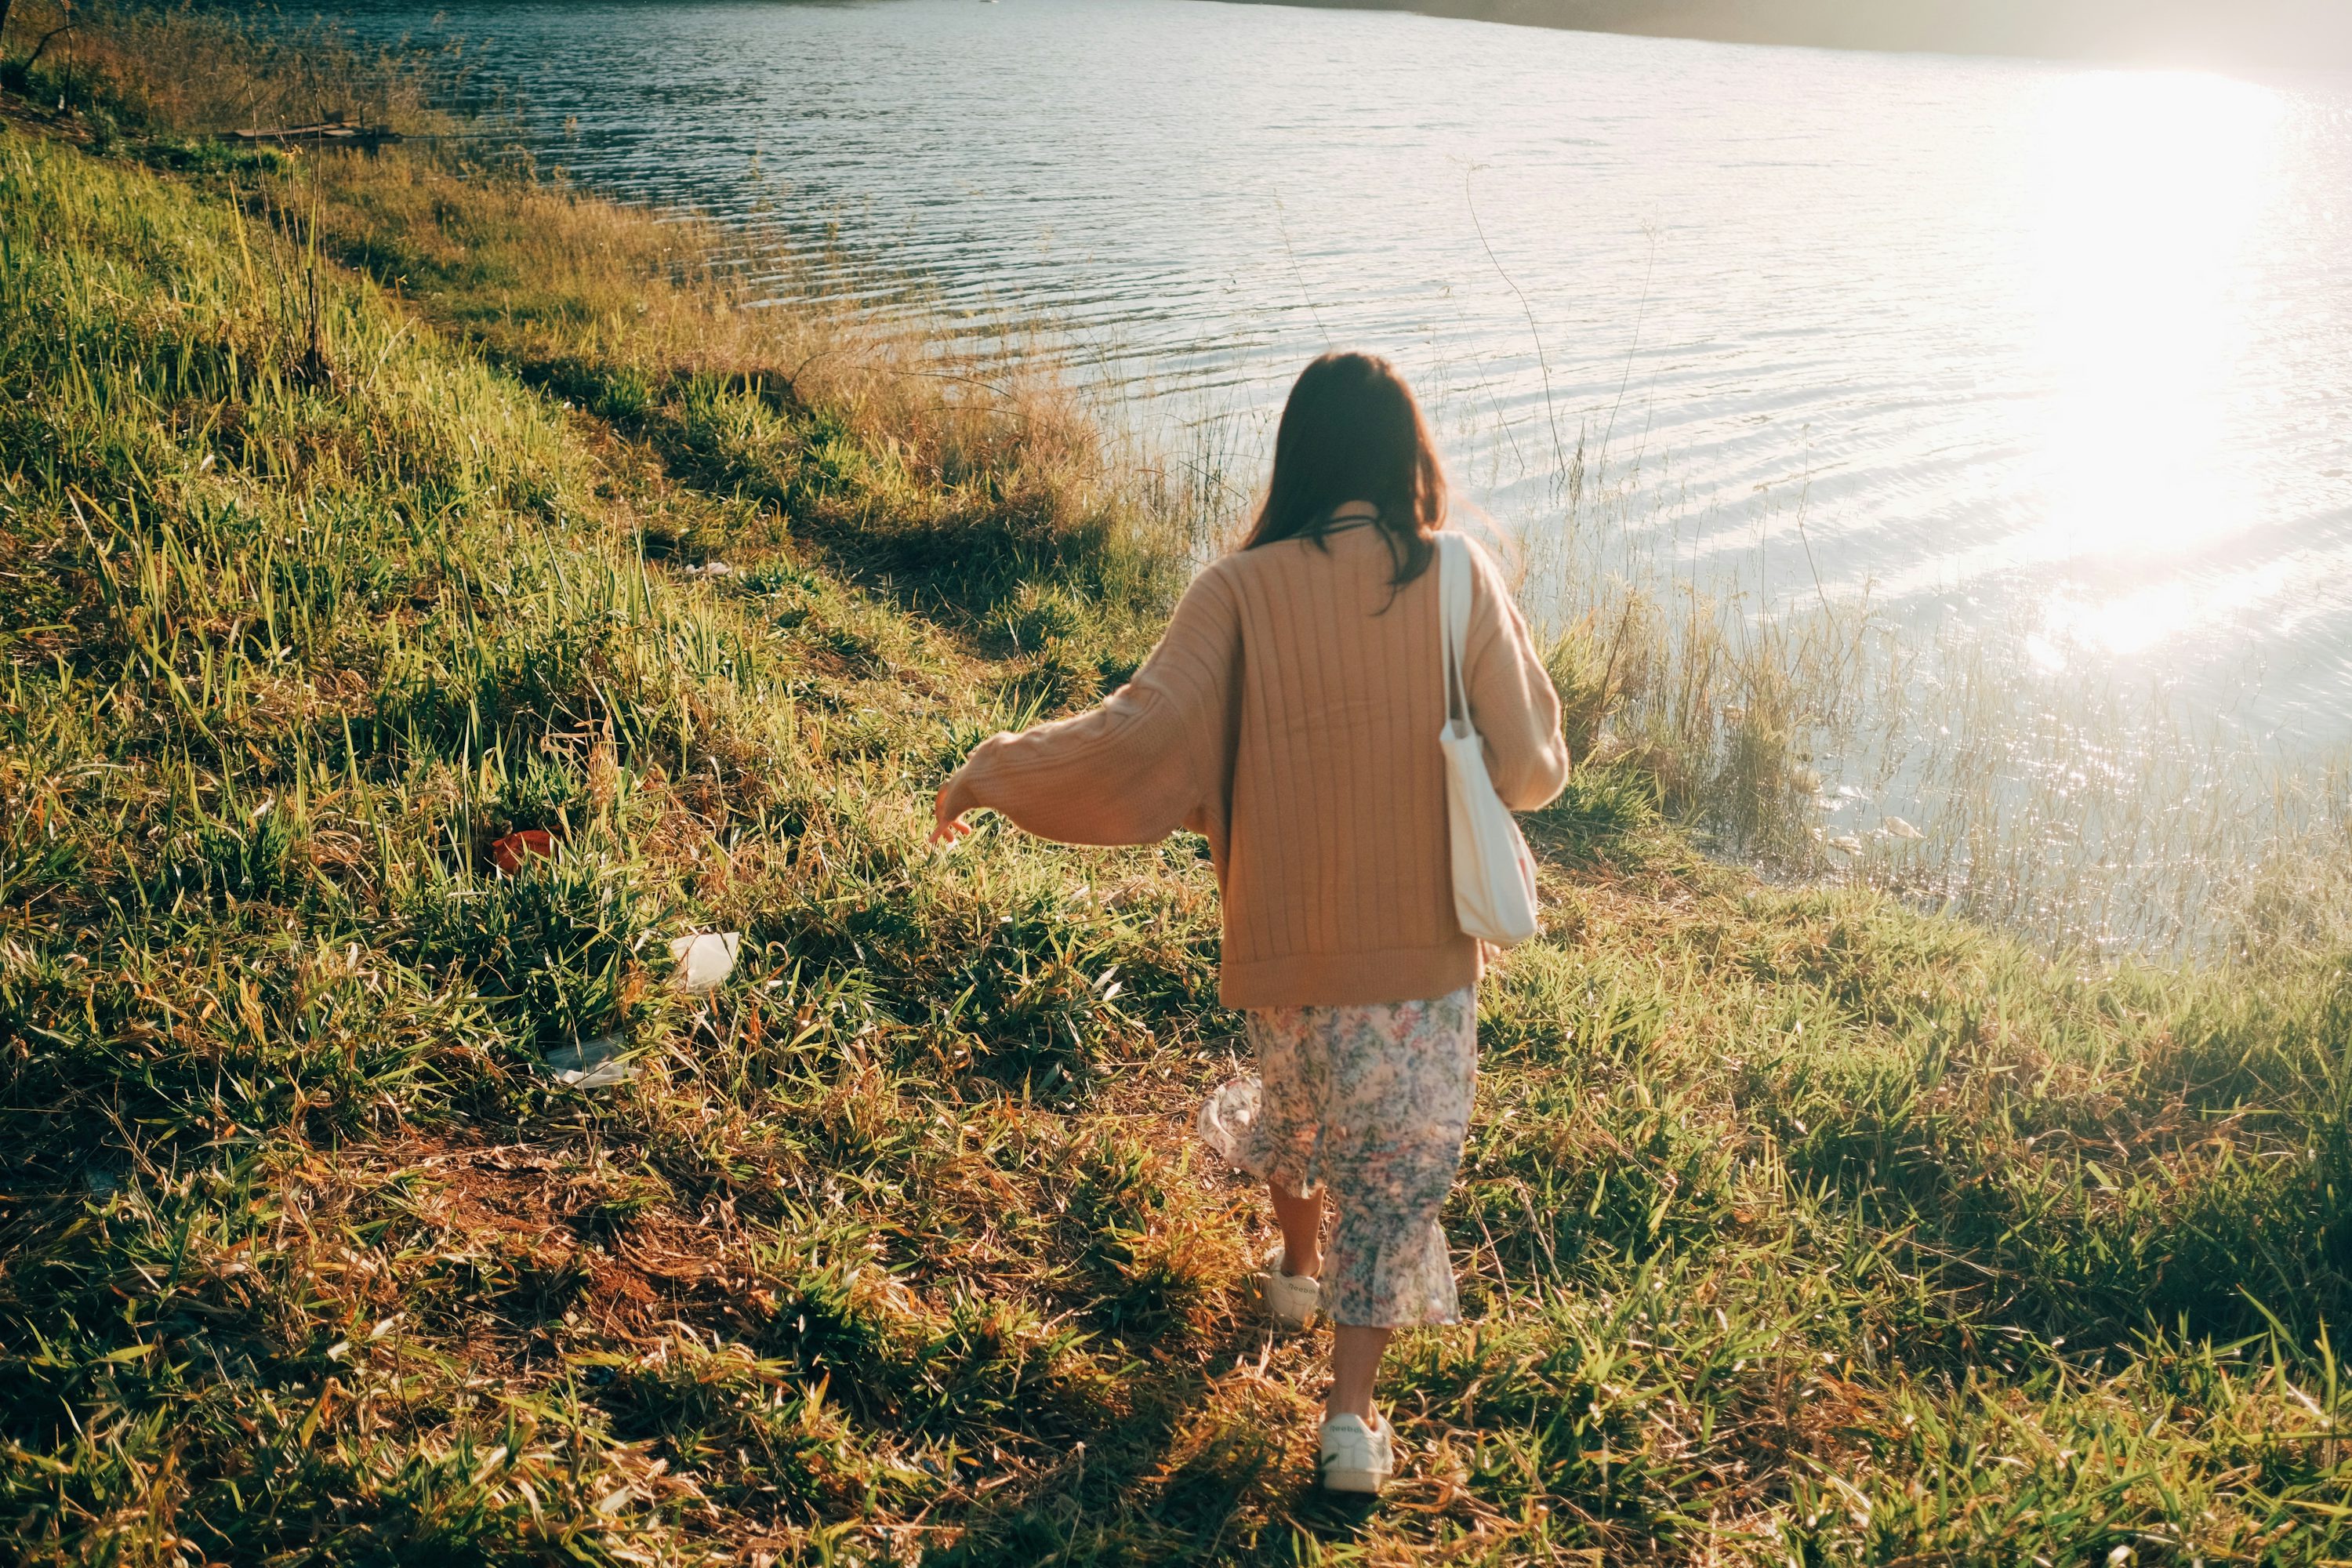 a woman walking along a grass covered hillside next to a body of water